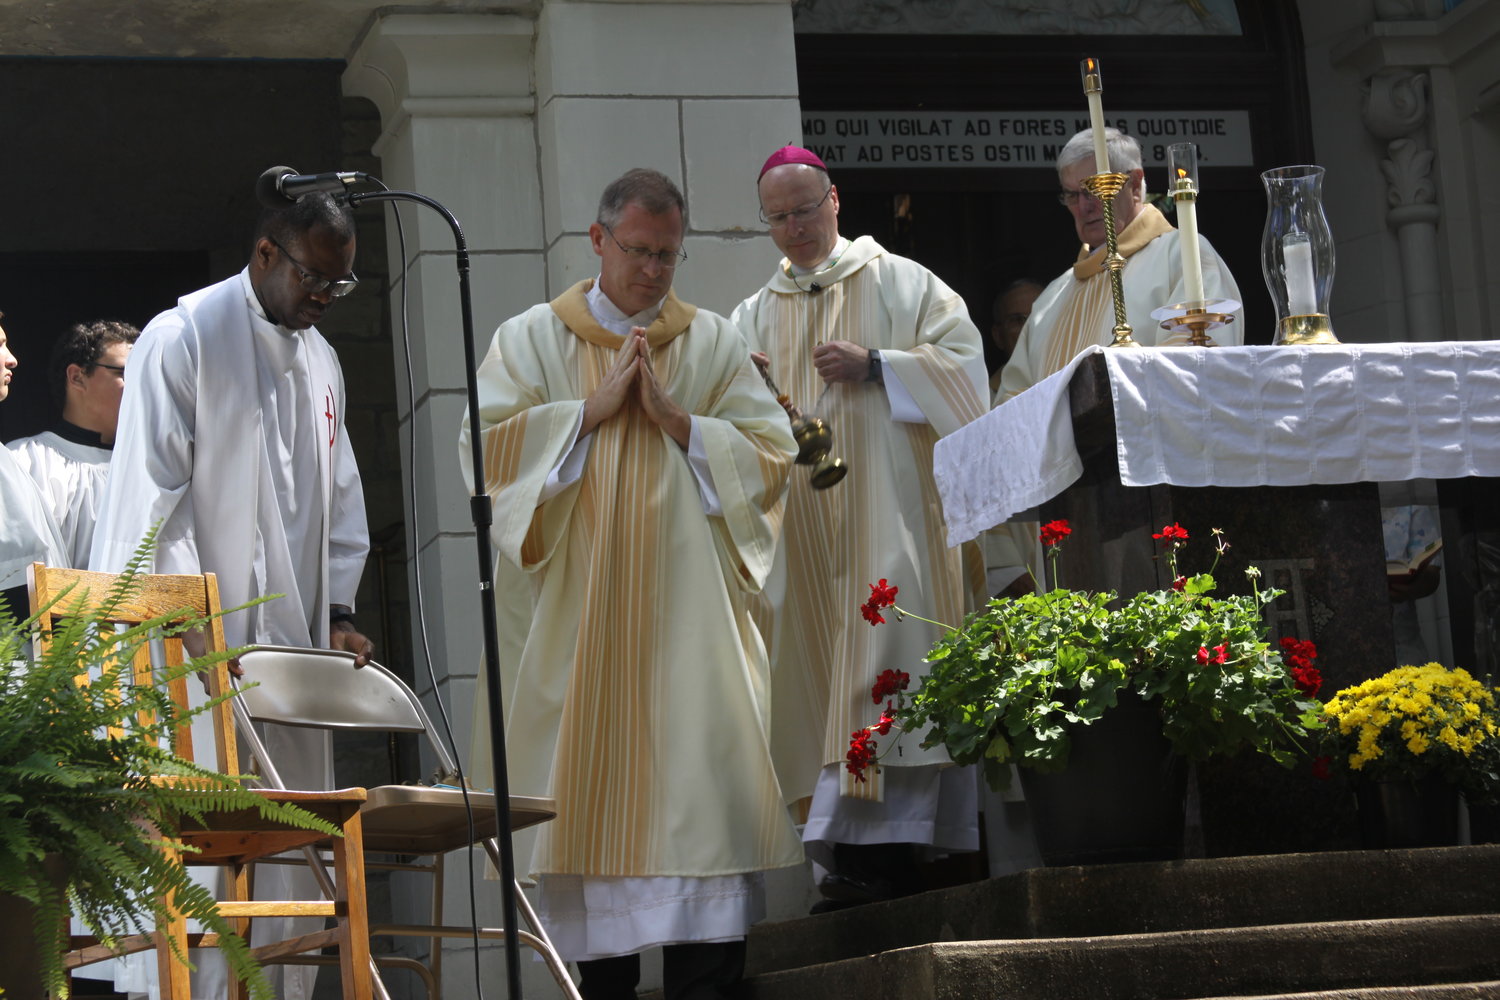 Bishop W. Shawn McKnight incenses the altar during Mass on Sept. 11 at the outdoor altar of the Shrine of Our Lady of Sorrows in Starkenburg.